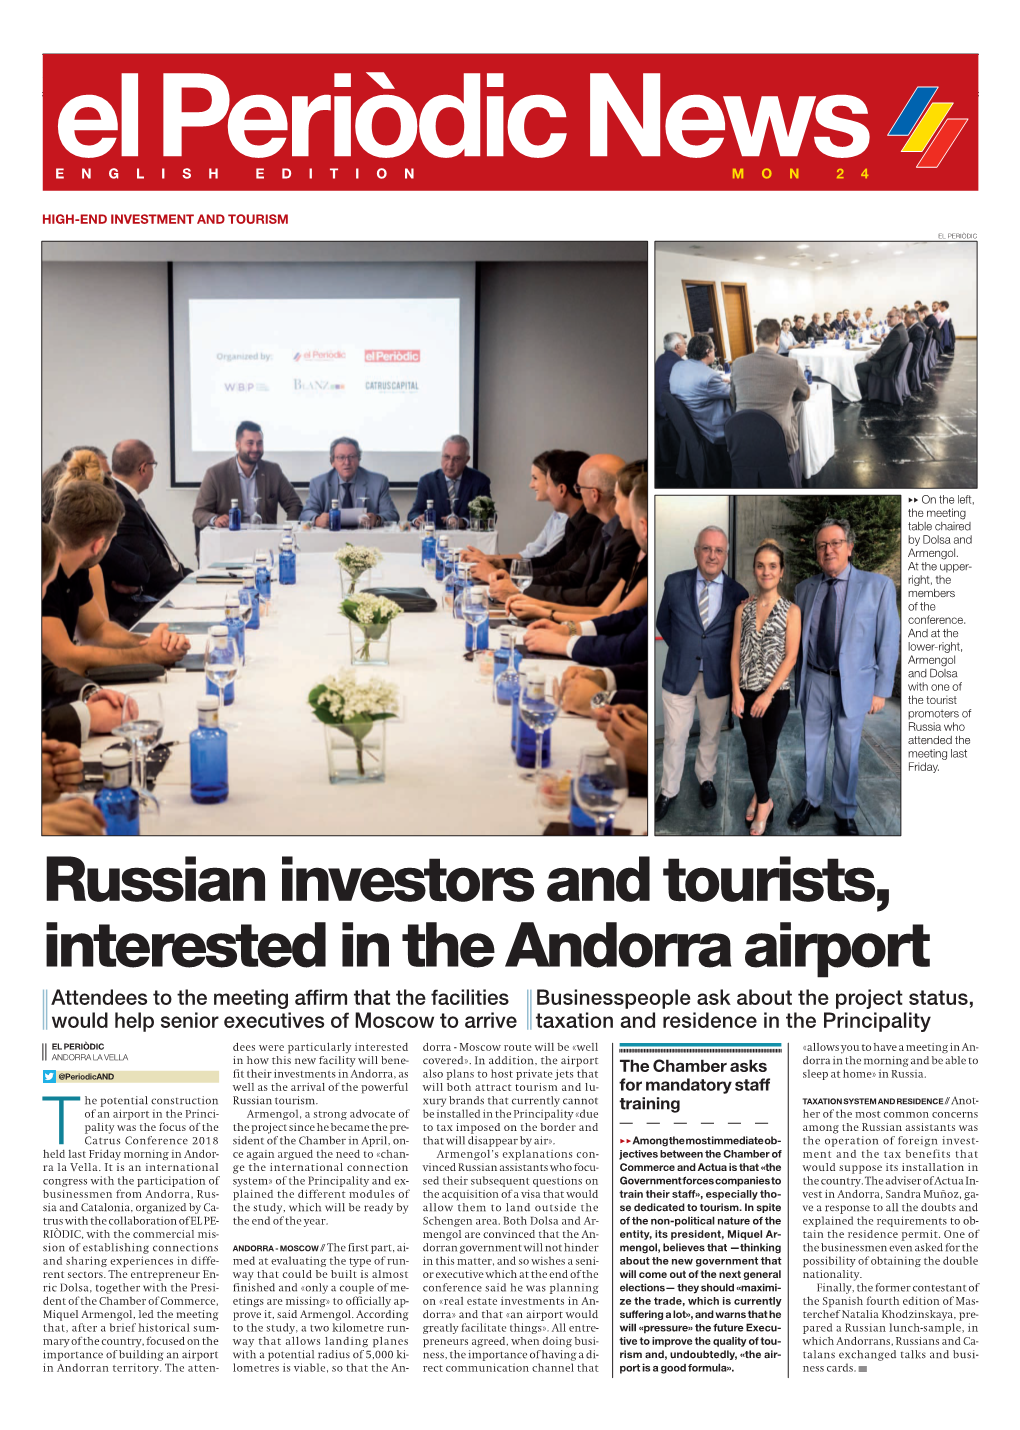 Russian Investors and Tourists, Interested in the Andorra Airport